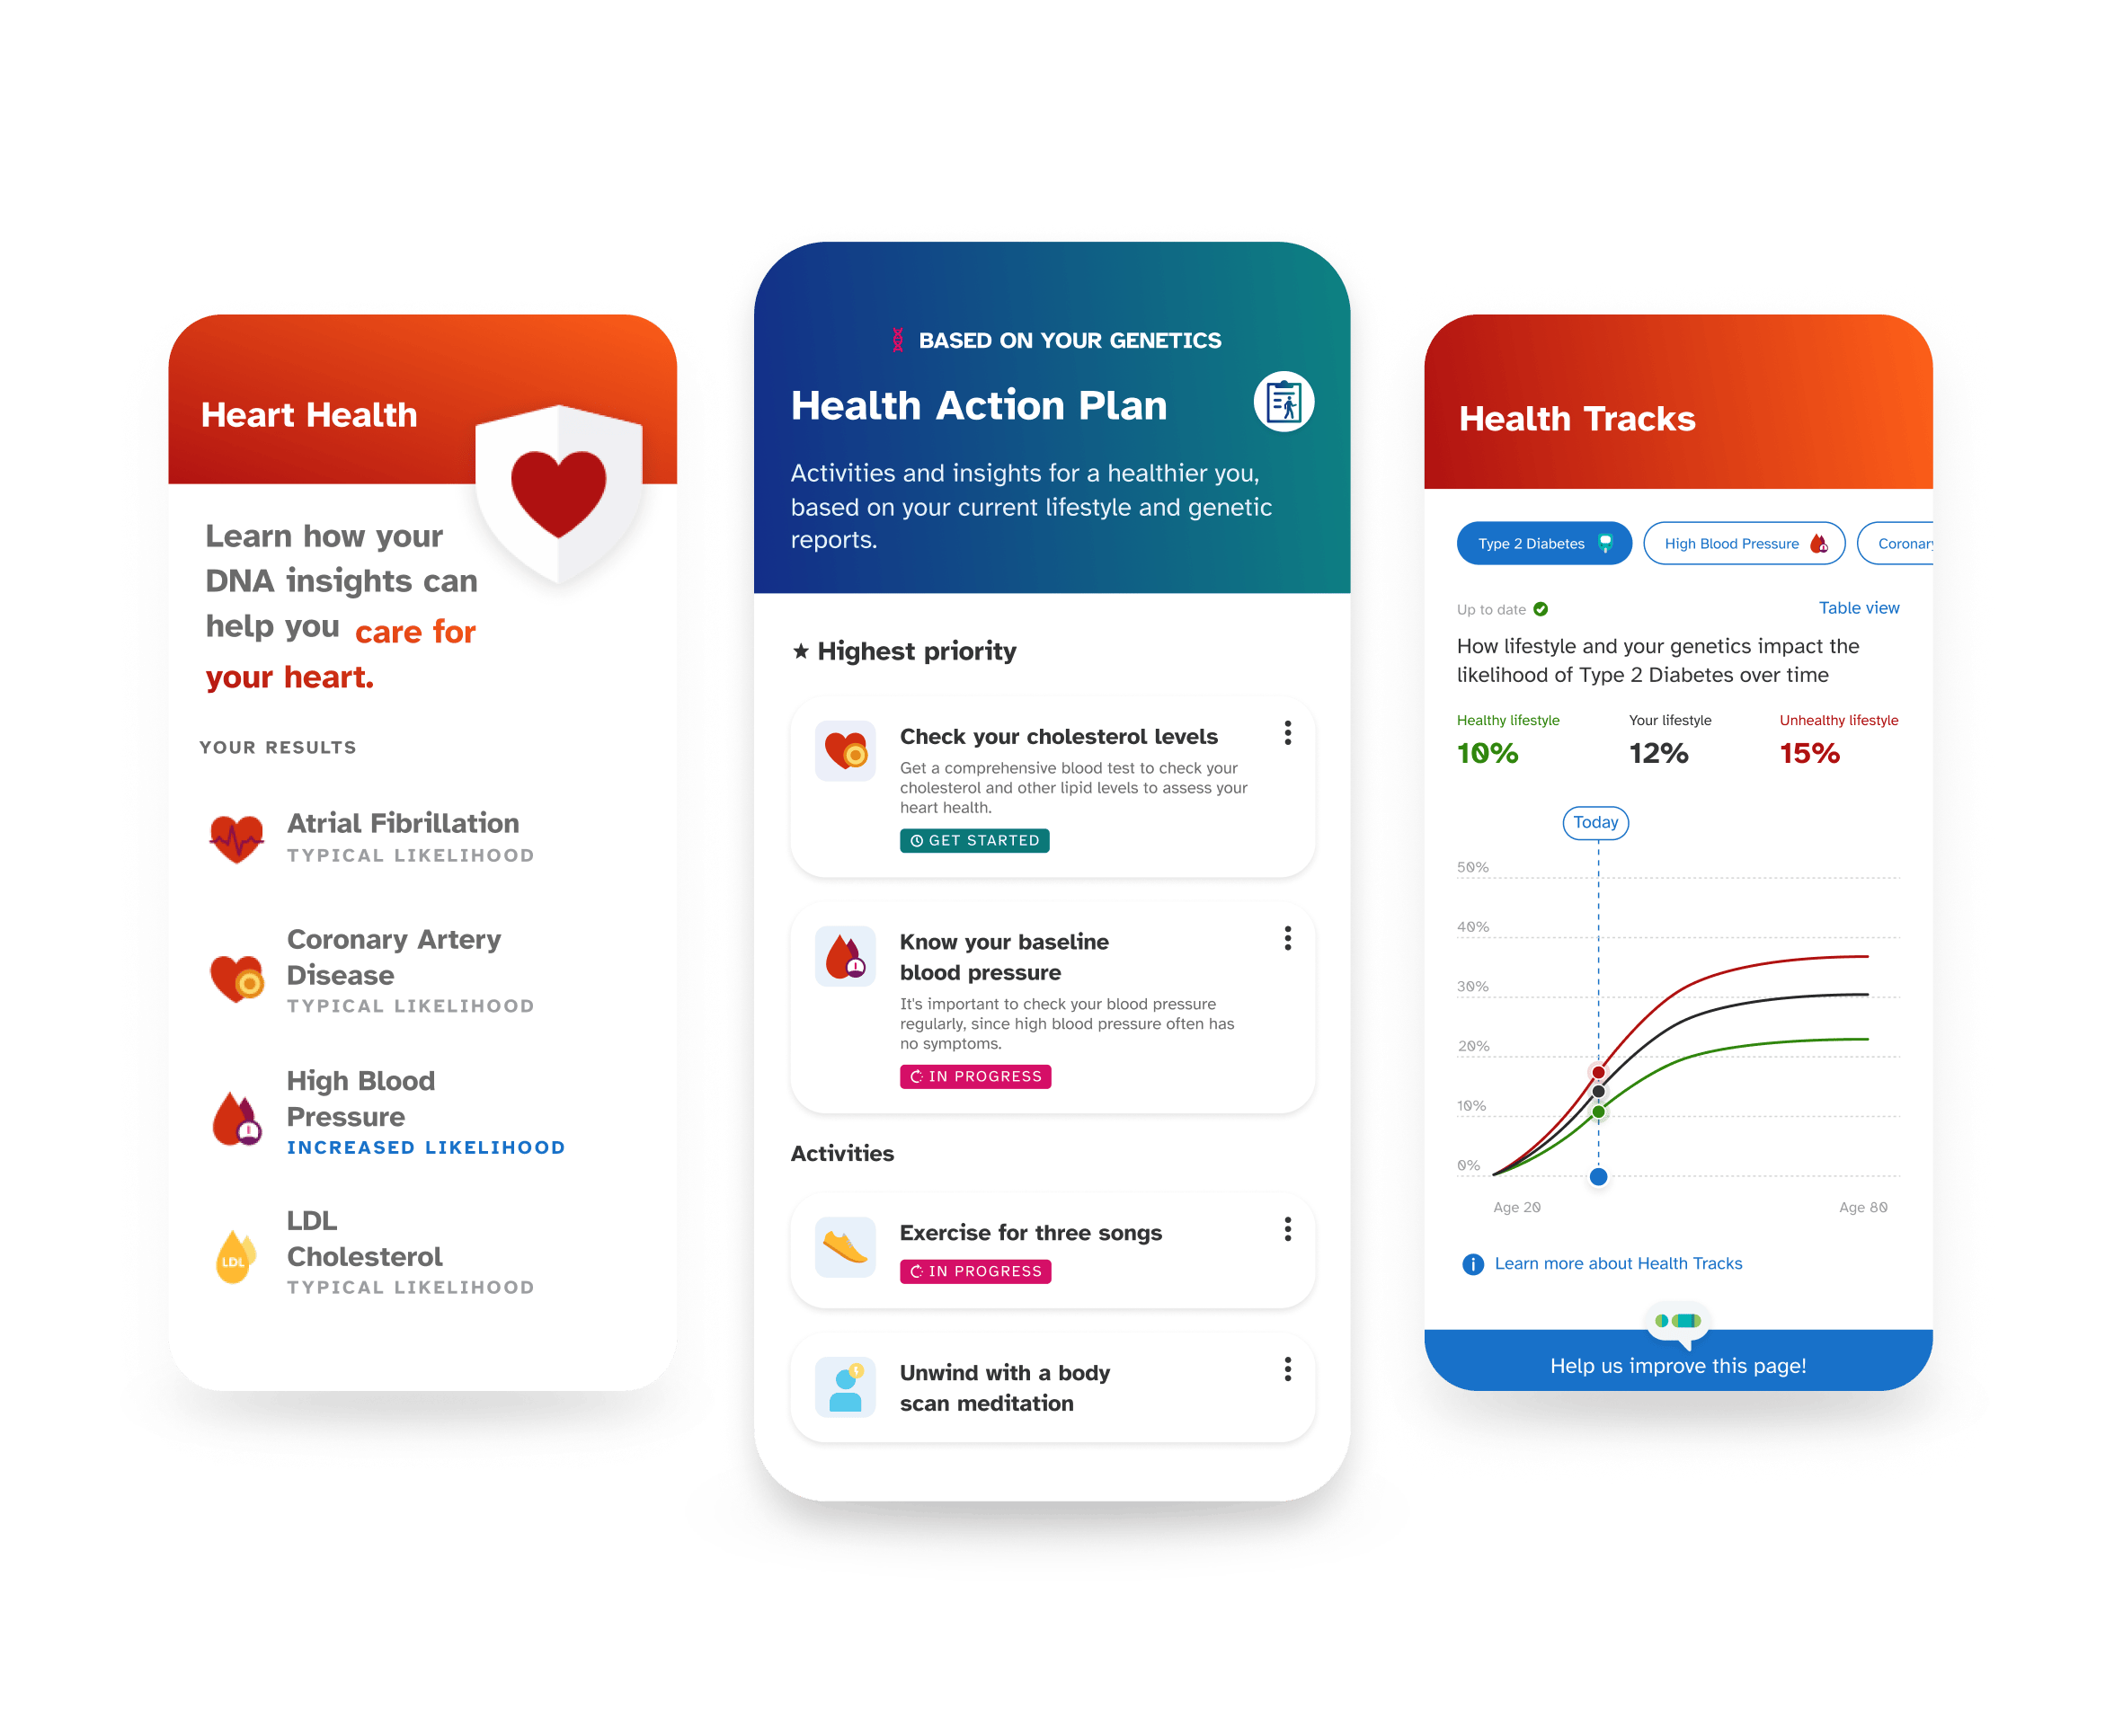 Sample reports including Heart Health, Health Action Plan, Health Tracks.